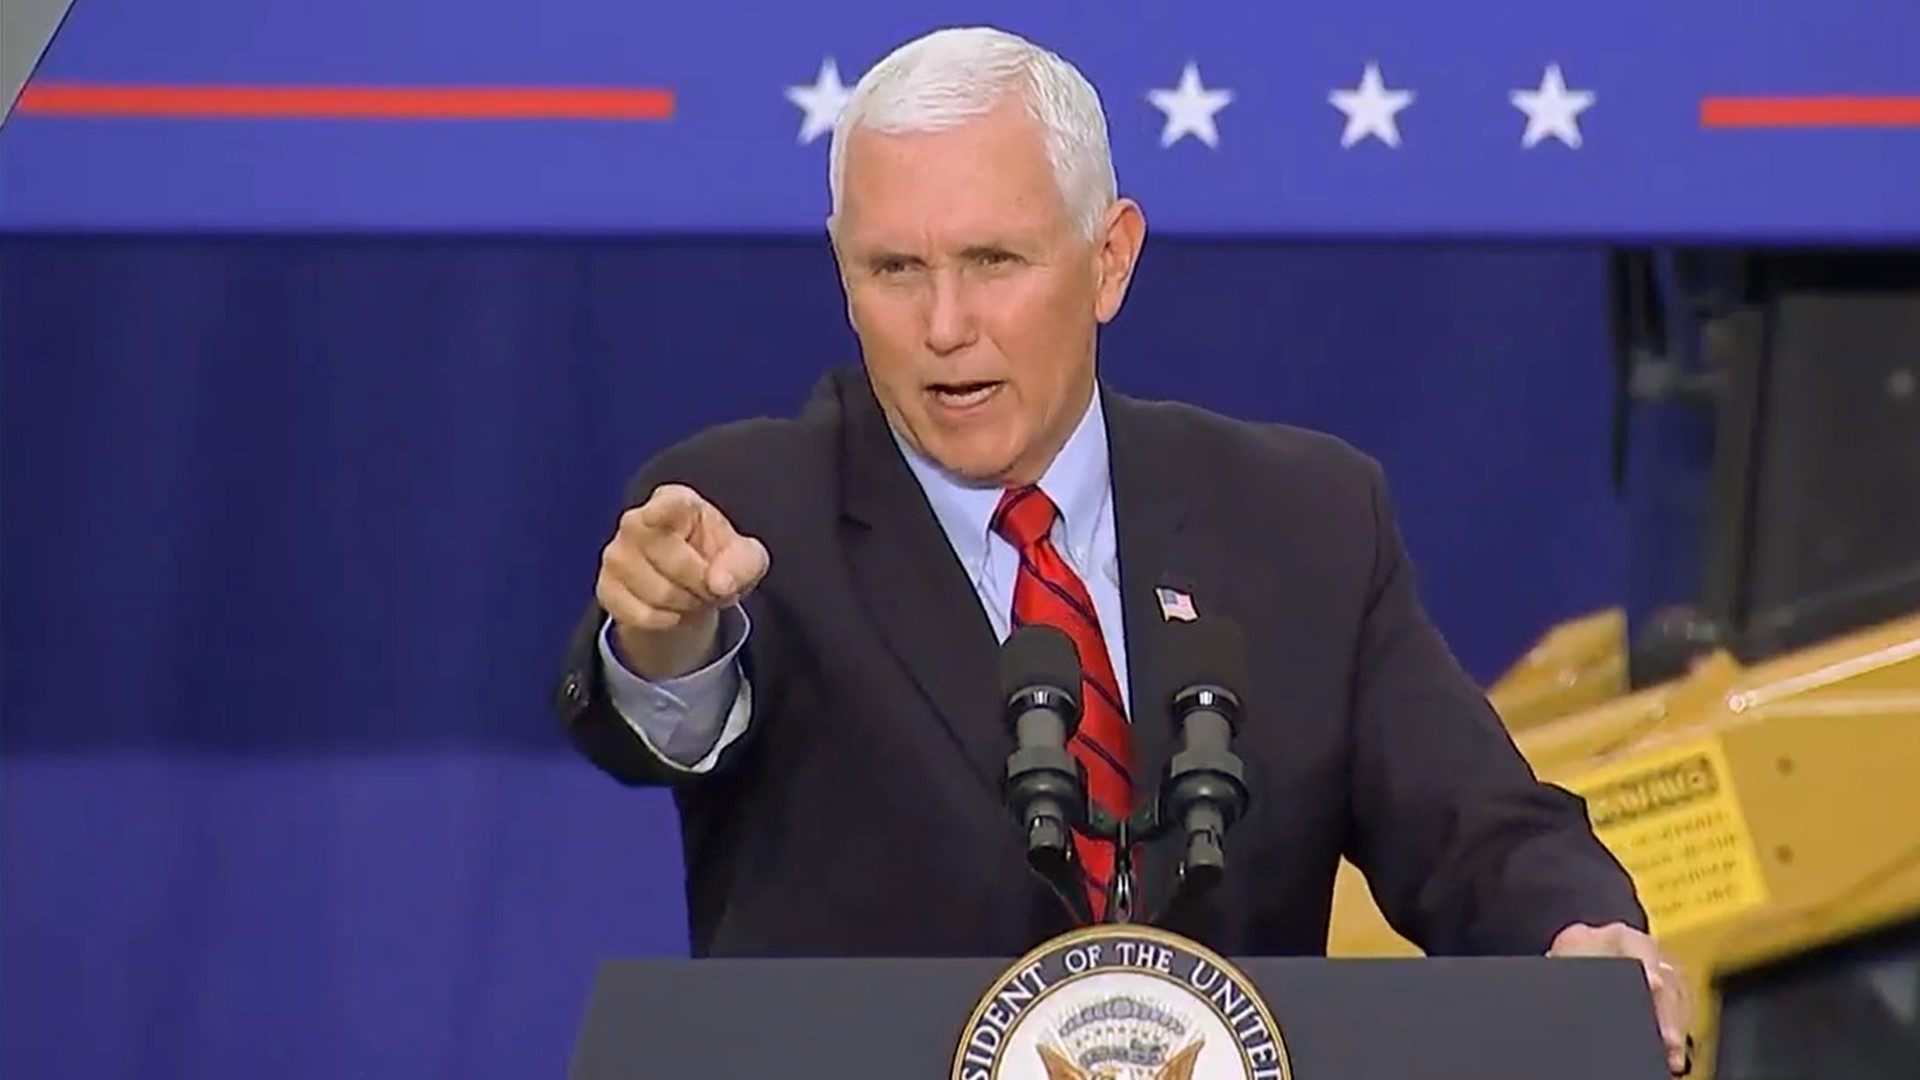 The vice president spoke around 4:30 p.m. to the rally at Kuharchik Construction in Exeter.